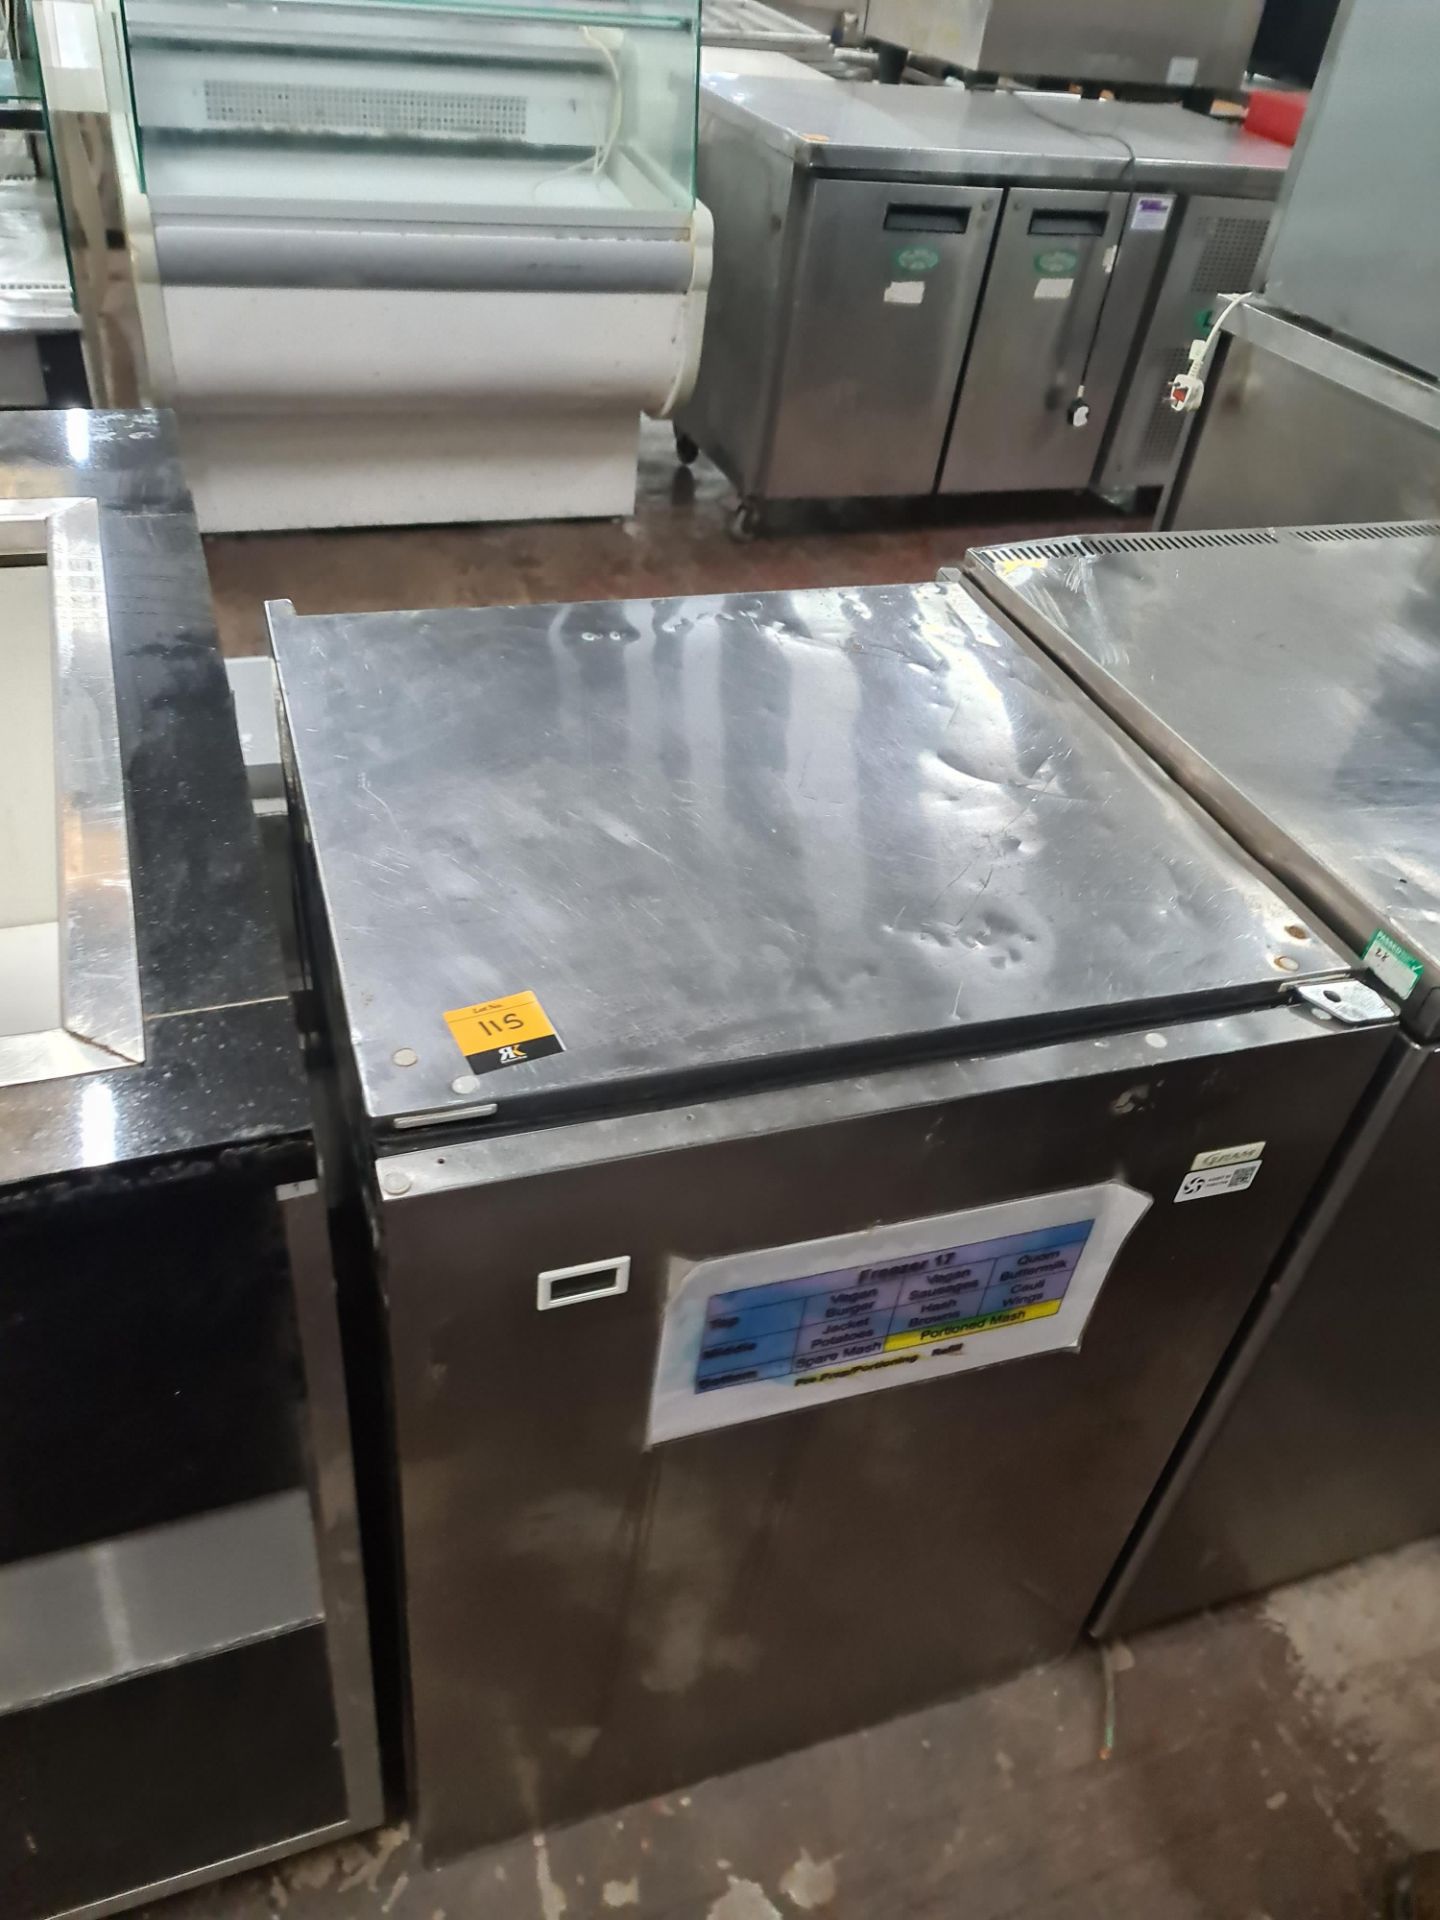 Gram stainless steel under counter freezer, model F150GB - Image 5 of 6